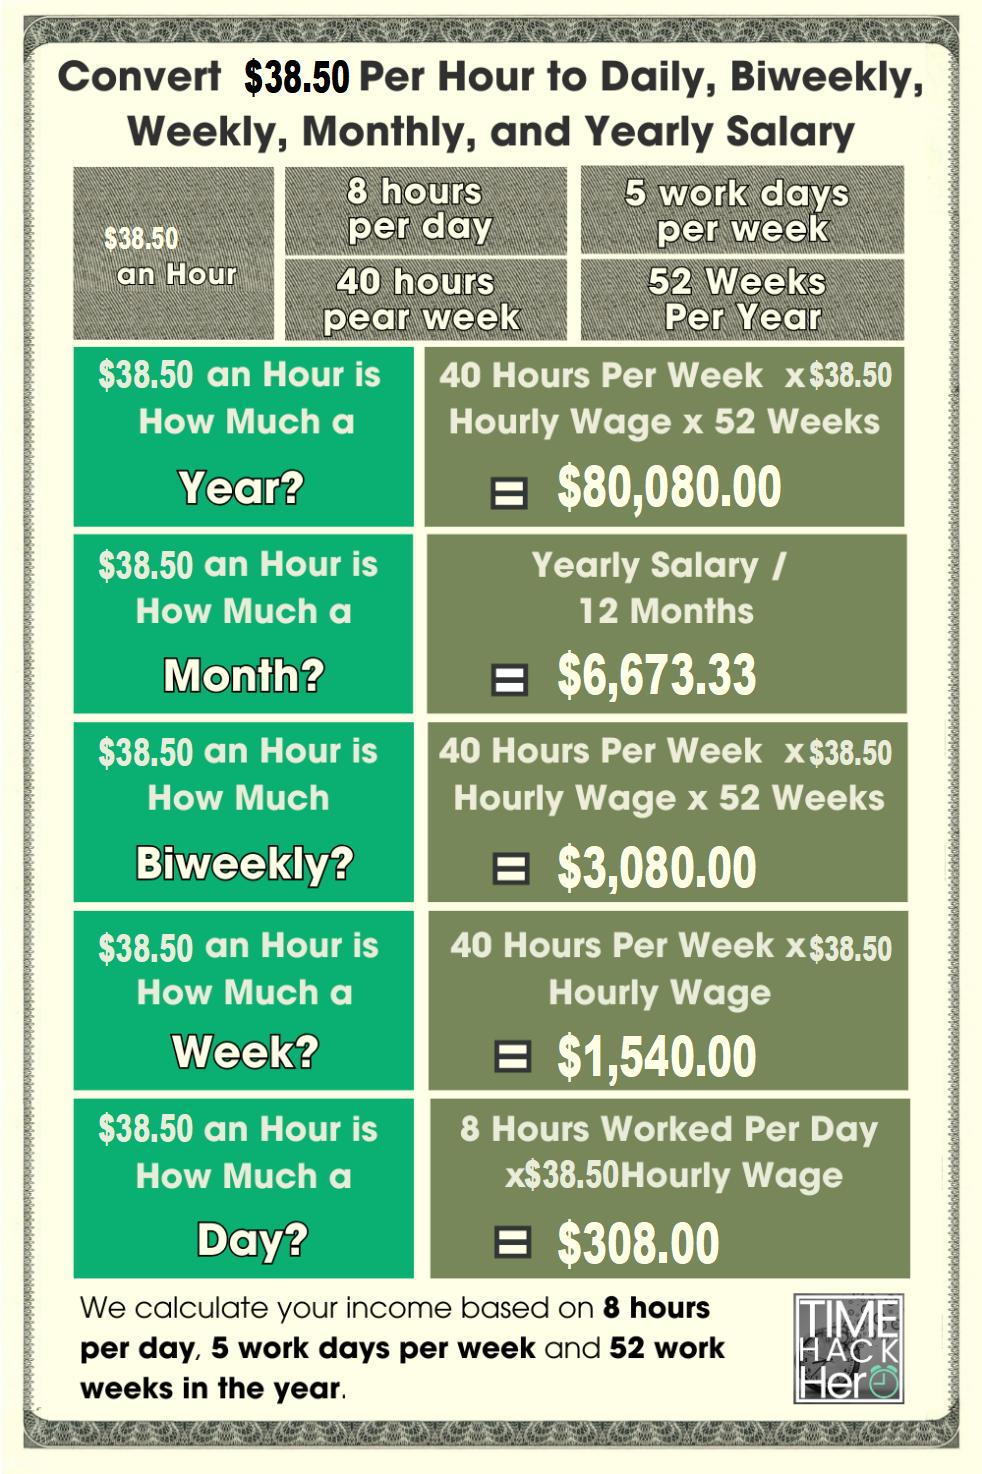 Convert $38.50 Per Hour to Weekly, Monthly, and Yearly Salary